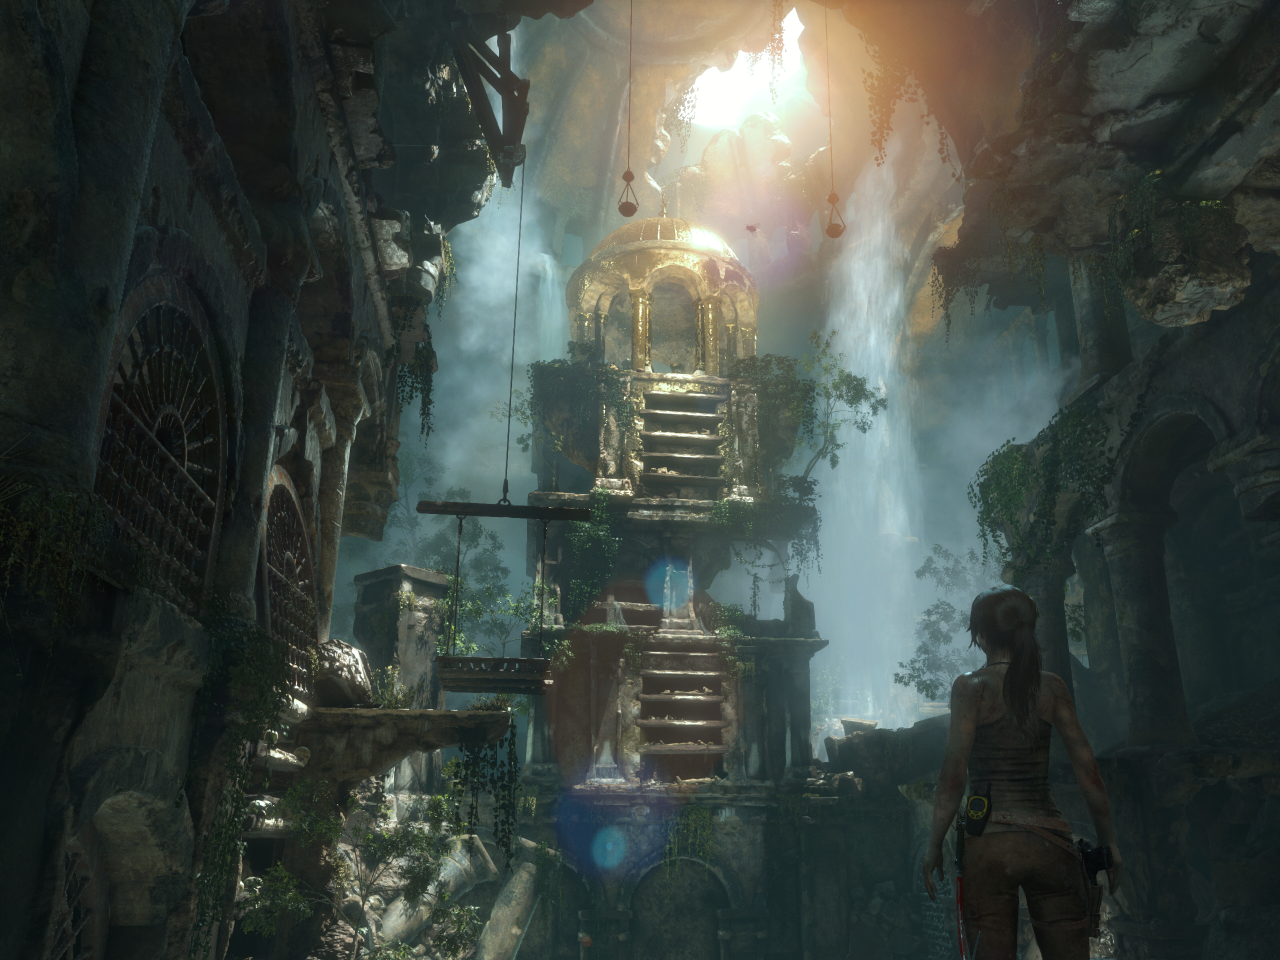 Naughty Dog finally fixes Uncharted's PC stuttering issues with a